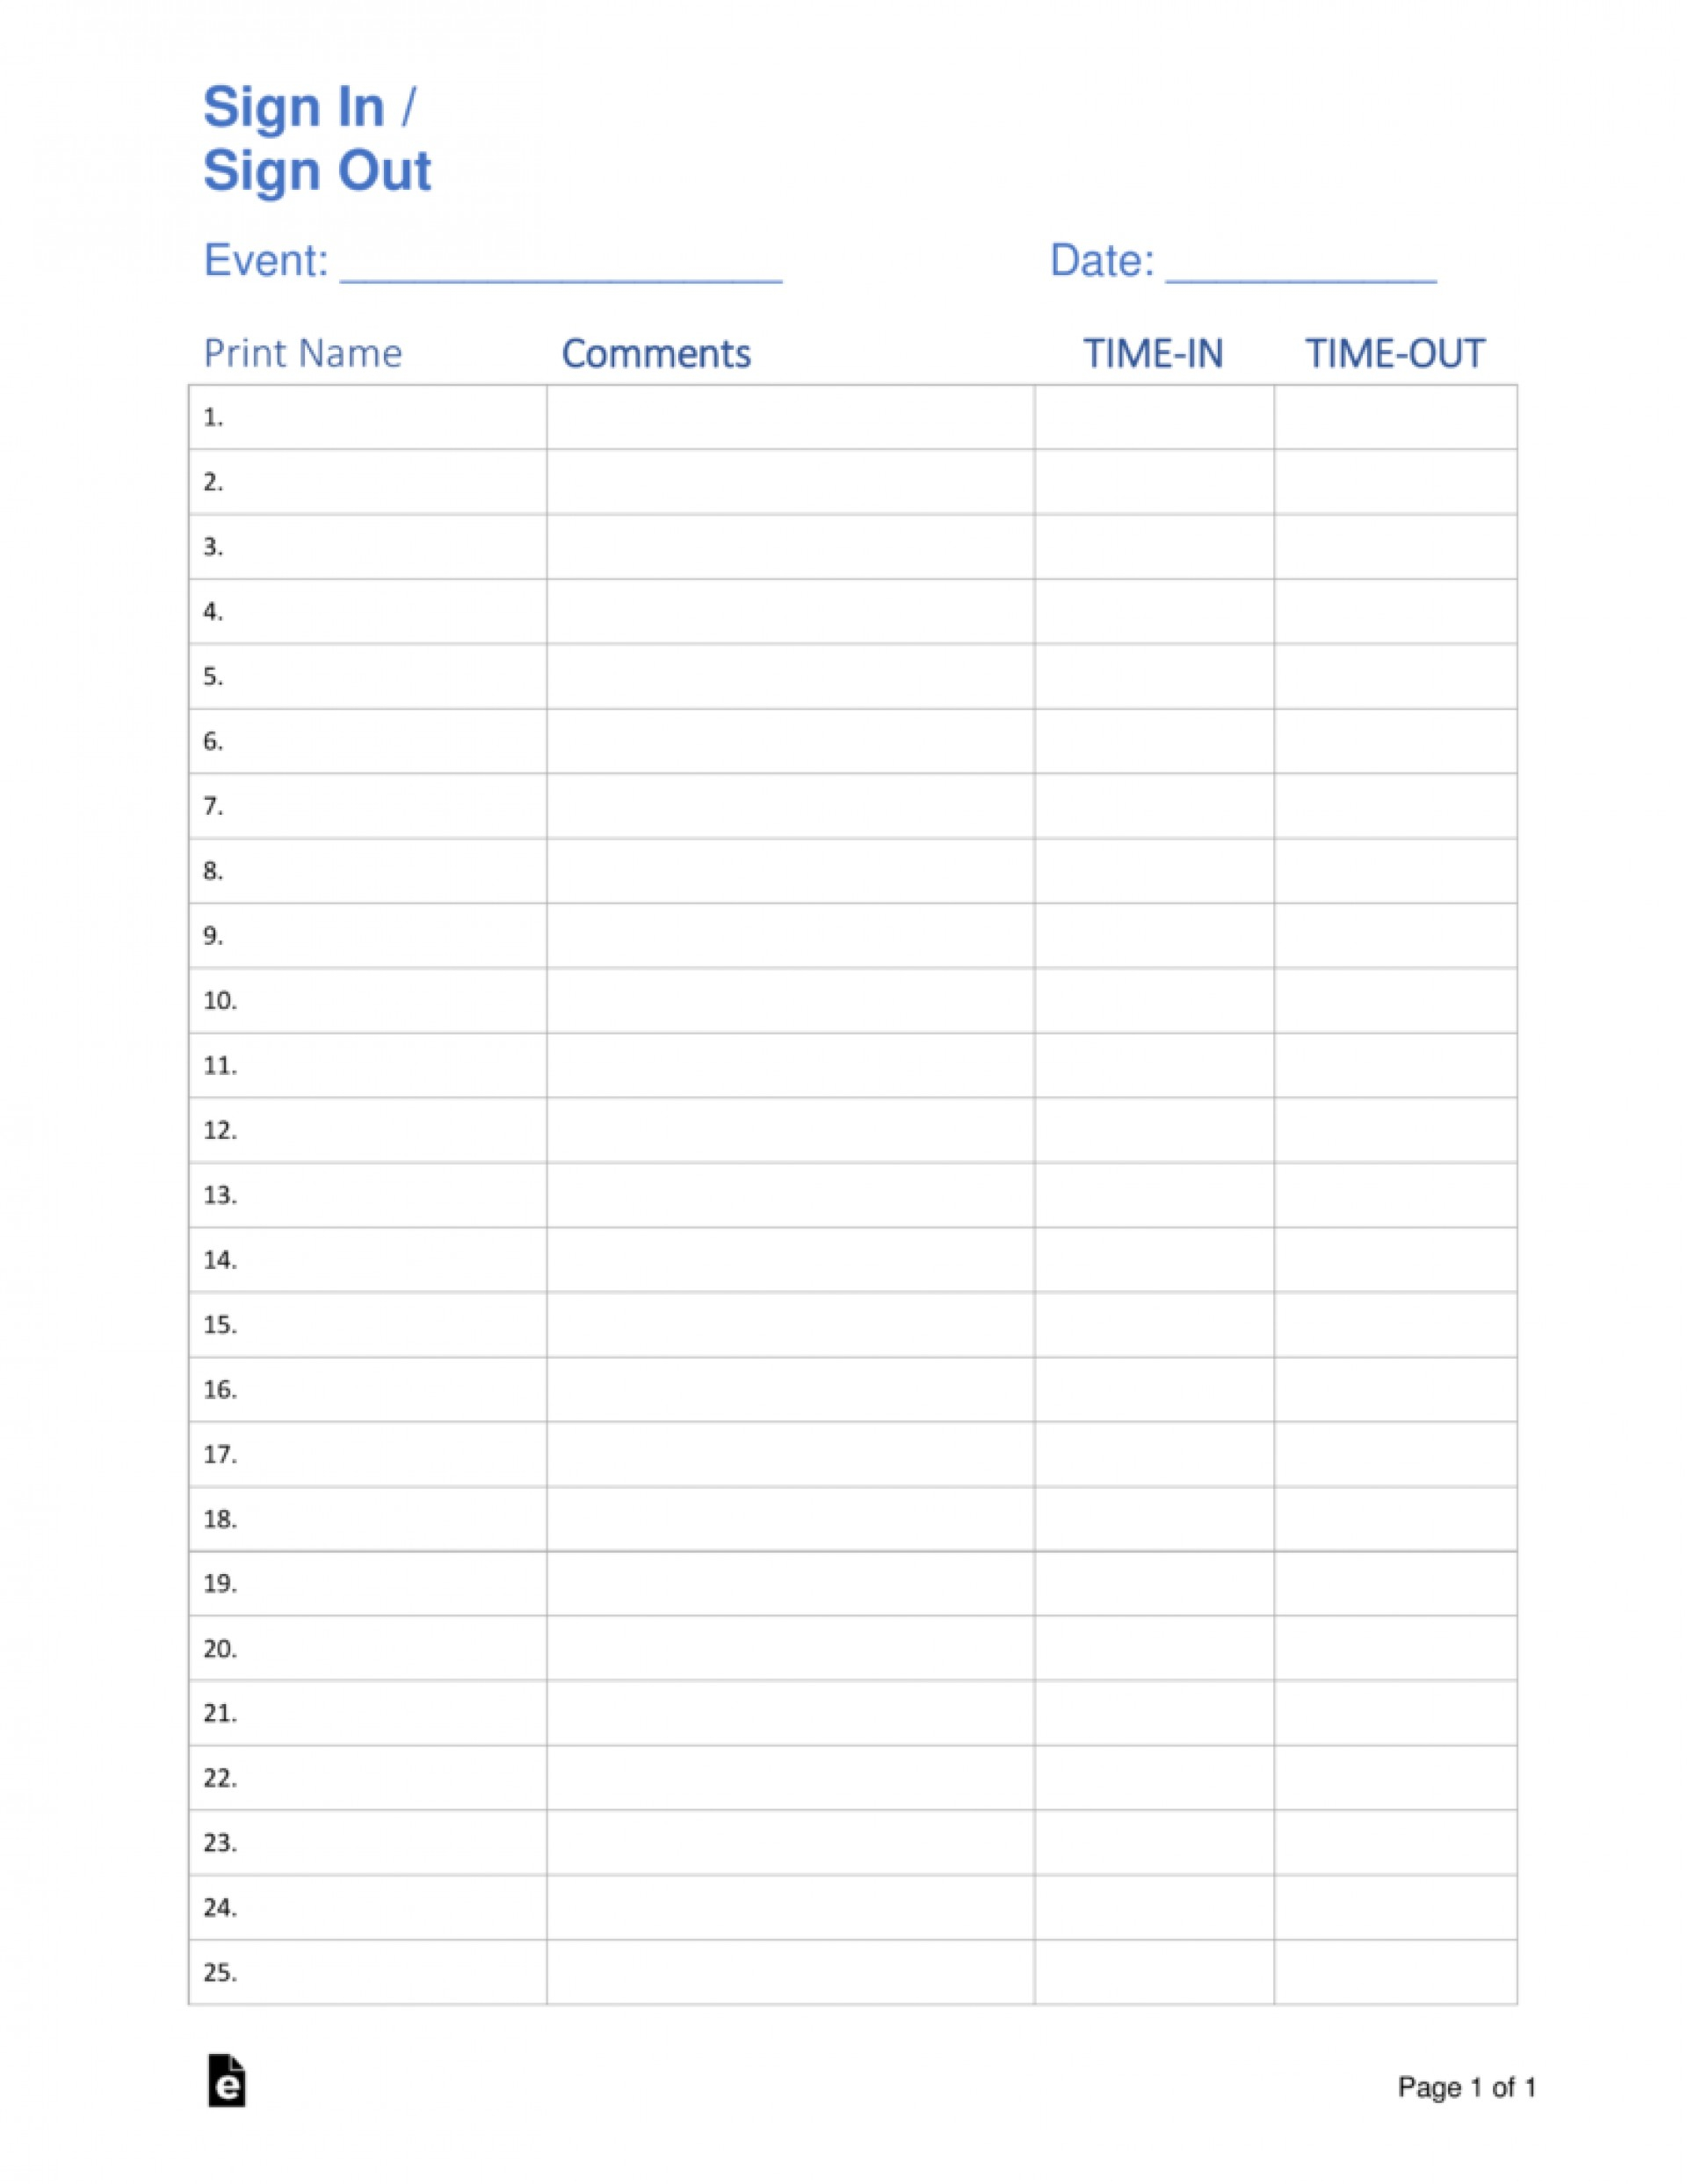 001 Sign In Sheet Templates Template Ideas Visitor Out ~ Ulyssesroom - Free Printable Sign In Sheet Template